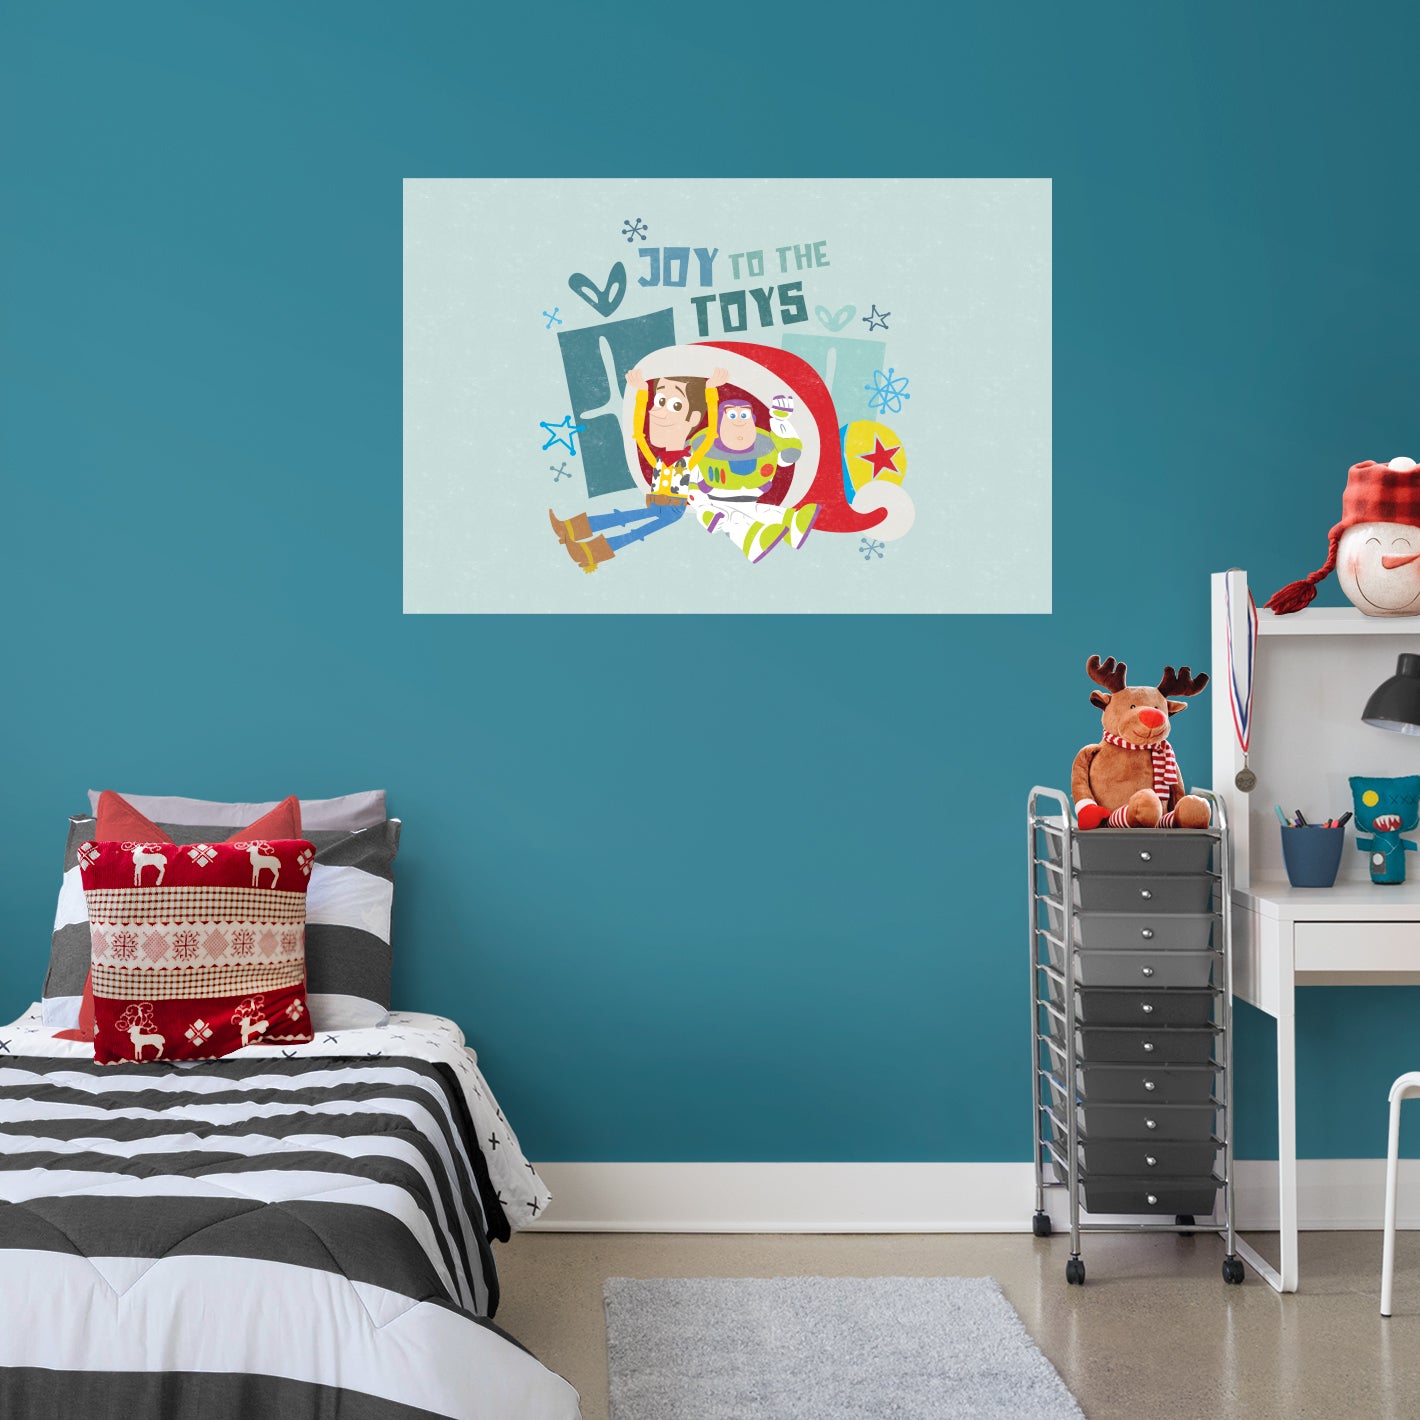 Toy Story Festive Cheer: Buzz & Woody Joy to the Toys Mural        - Officially Licensed Disney Removable     Adhesive Decal